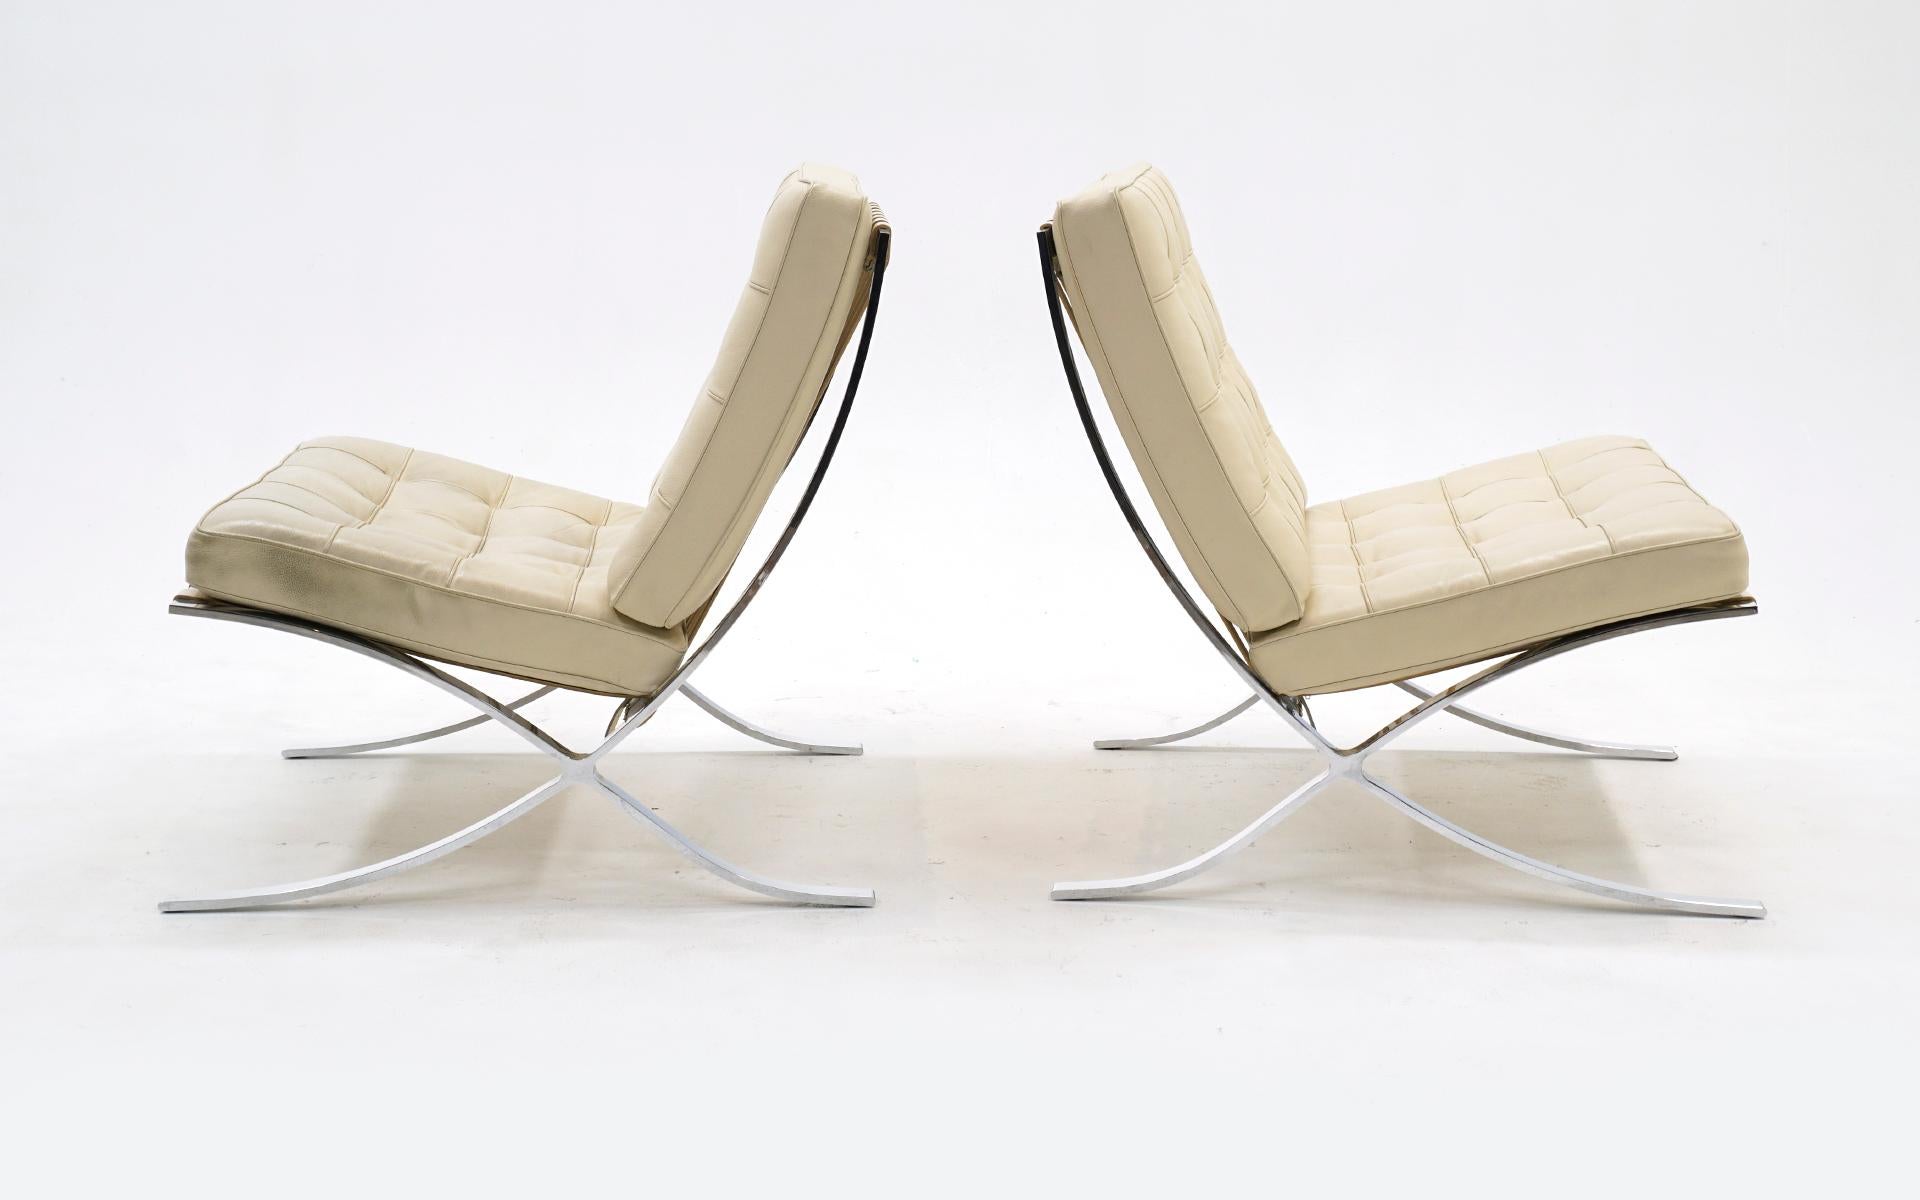 Bauhaus Pair White Leather Barcelona Chairs, Chromed Steel Frames, Authentic, Original